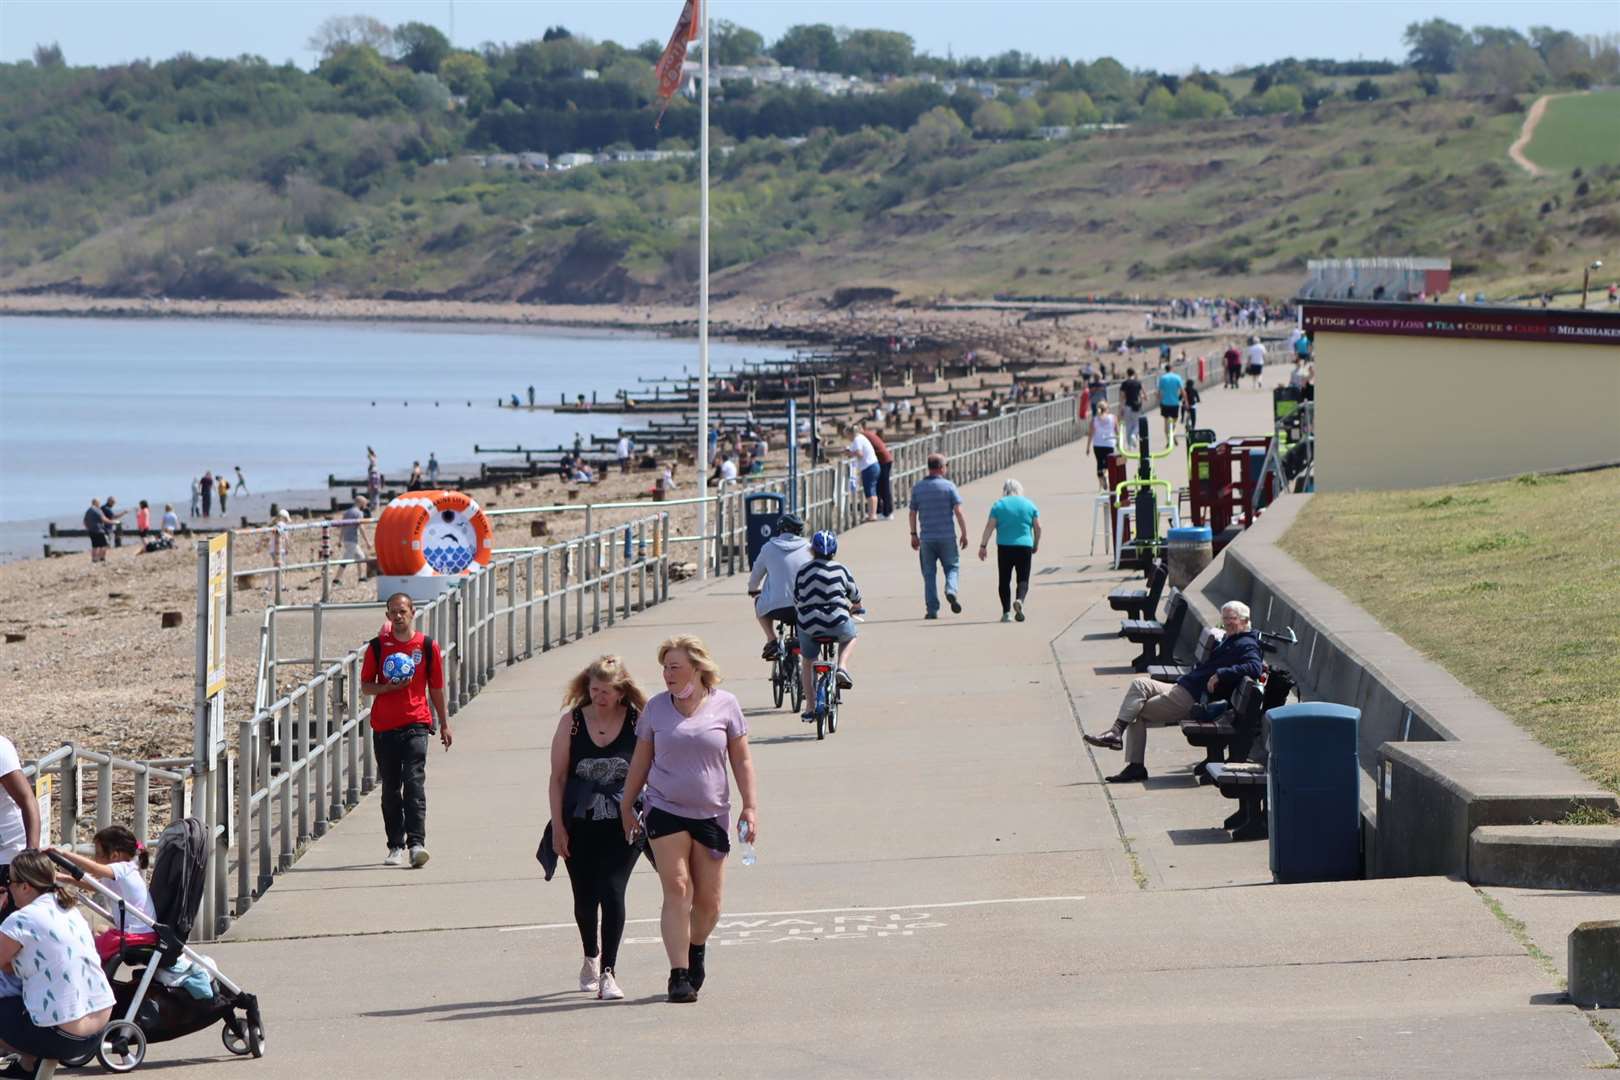 As lockdown measures eased in May, many took the chance to enjoy more freedom and good weather in Kent's open spaces, such as these walkers on the promenade at The Leas, Minster, Sheppey.